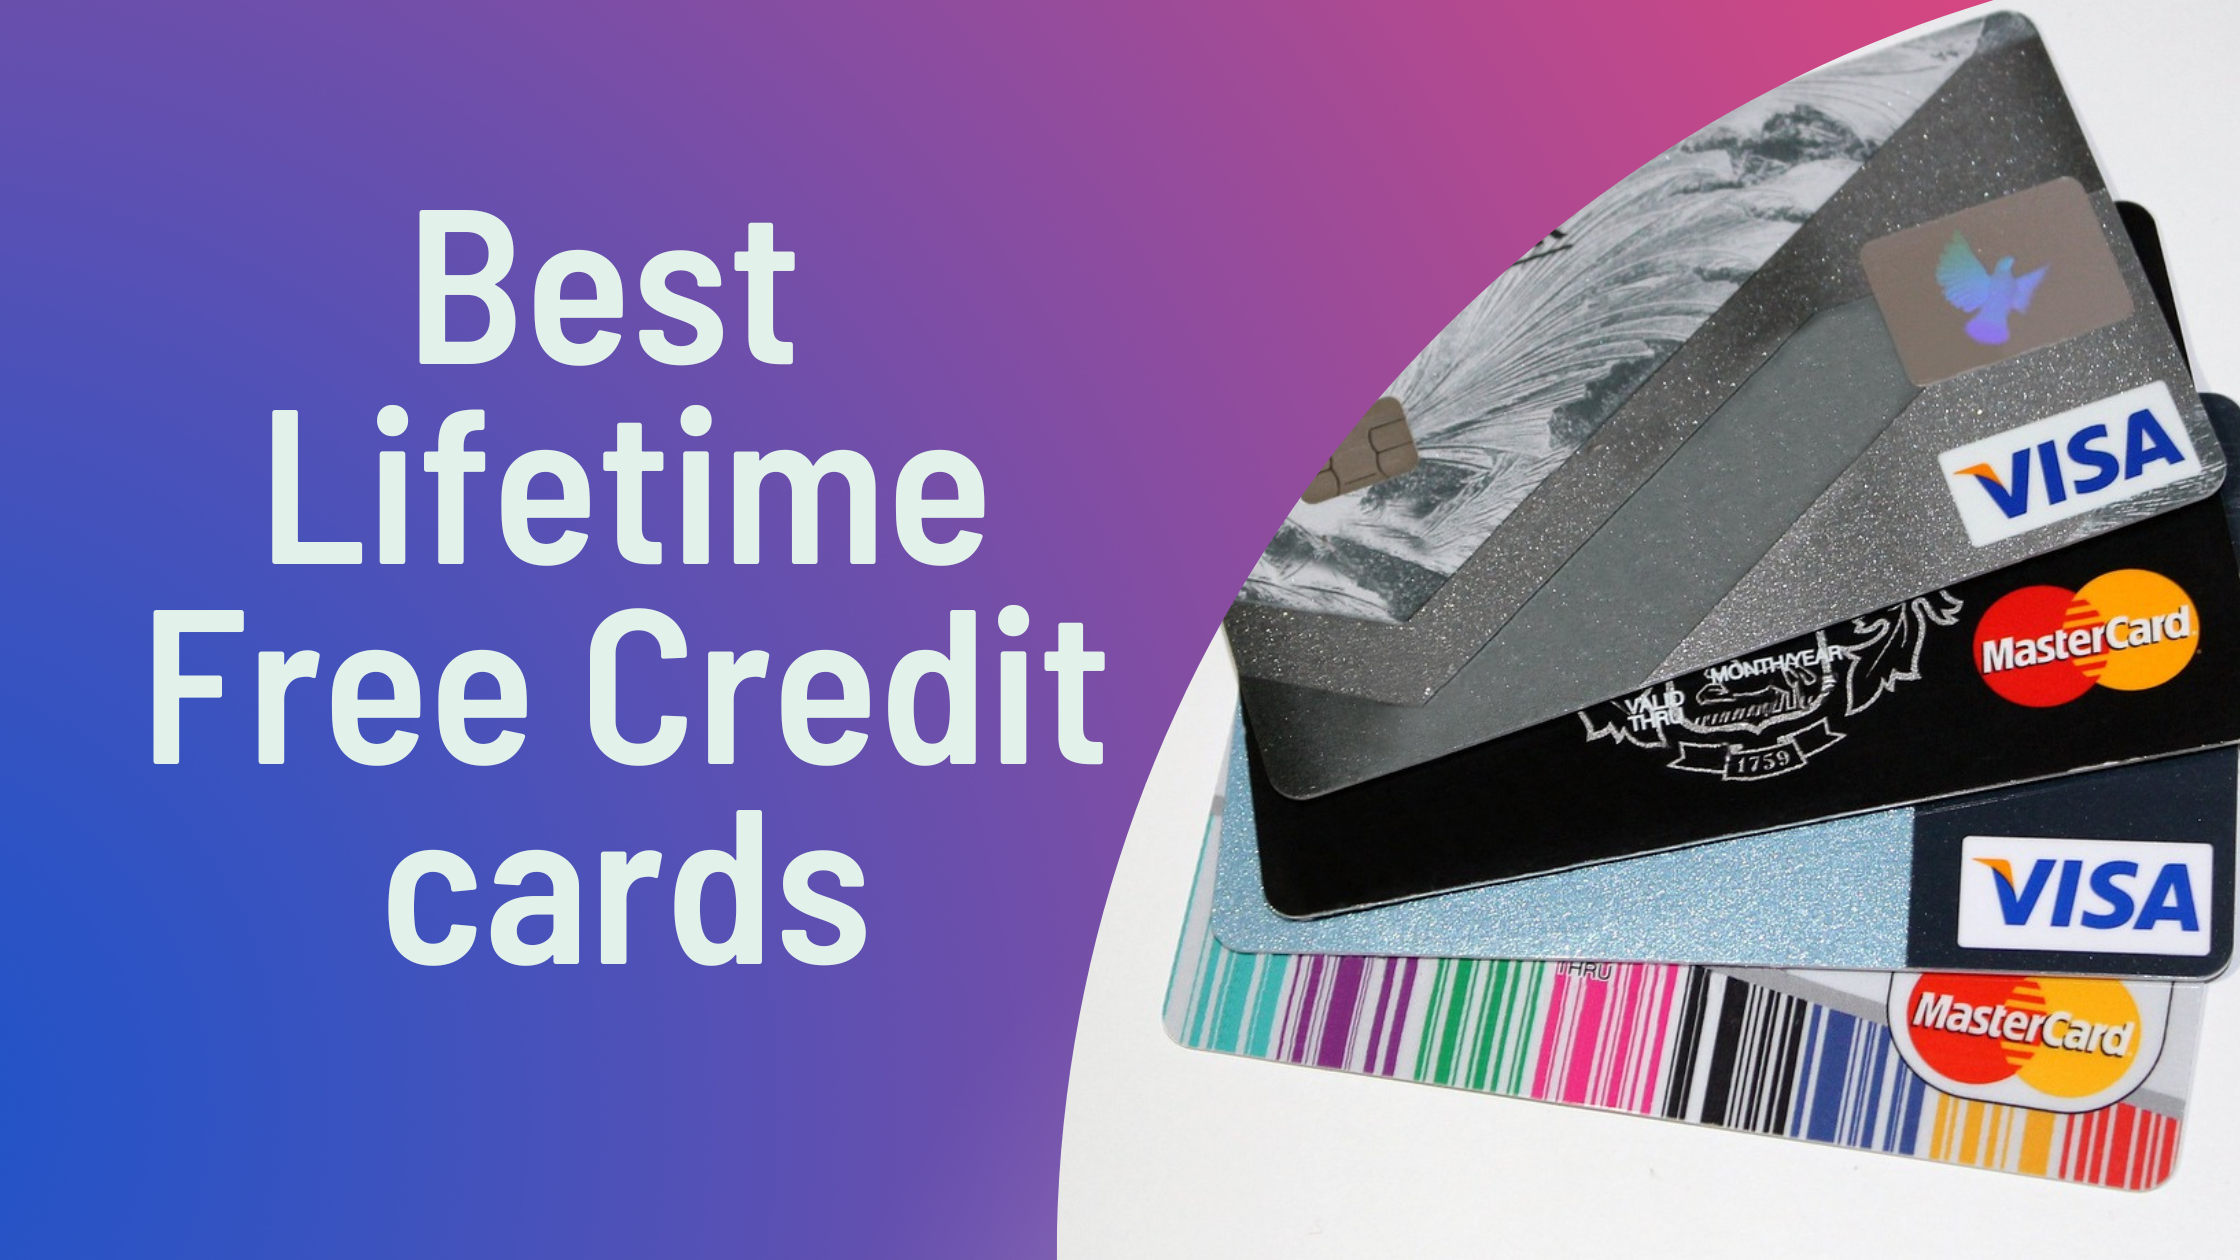 Best lifetime free credit cards in India